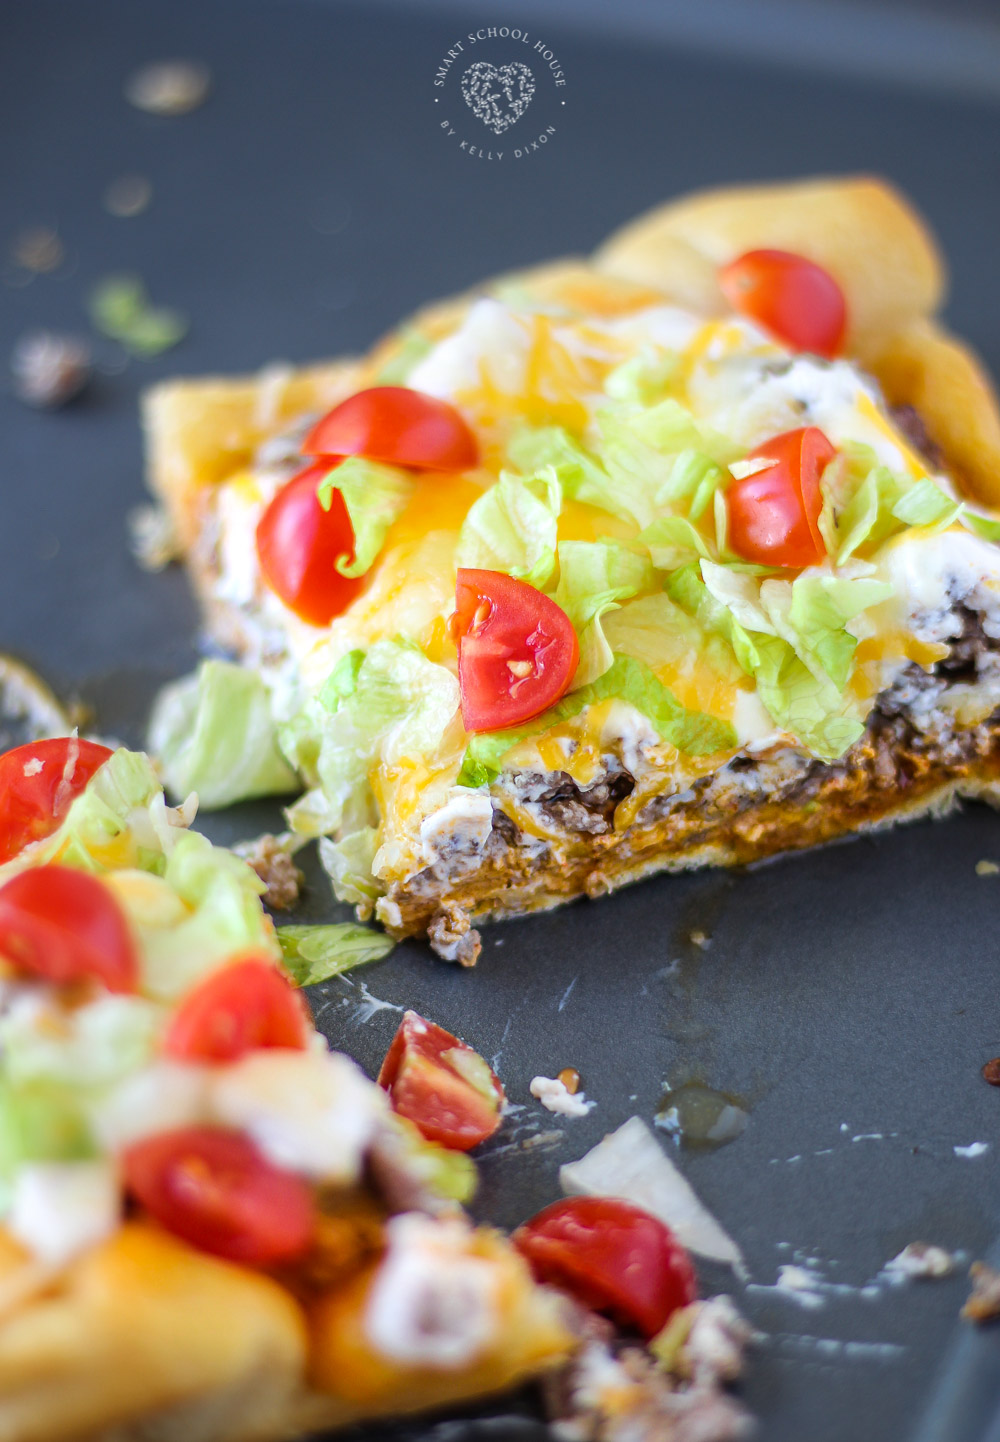 This 30 minute dinner turns fluffy crescent dough turned into pizza crust. The special cheese sauce in this Taco Pizza makes it OVER THE TOP!